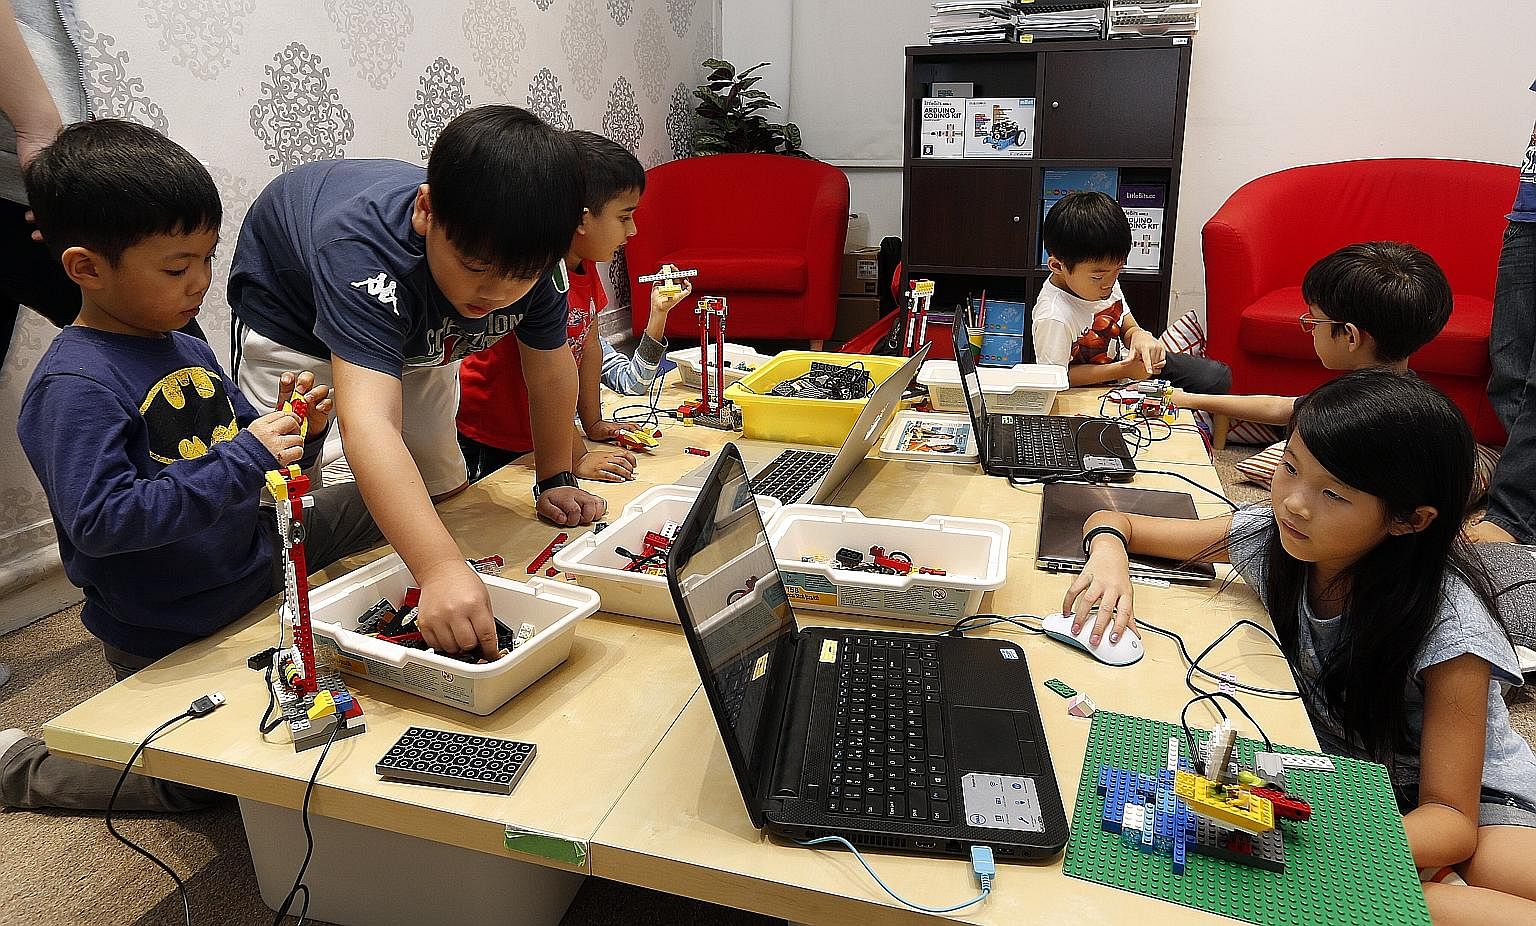 Children learning how to make their own robots using Lego pieces during a holiday workshop on robotics and game design at In3Labs. Robots and computer programs are helping do jobs ranging from delivering room service to providing financial advice, an